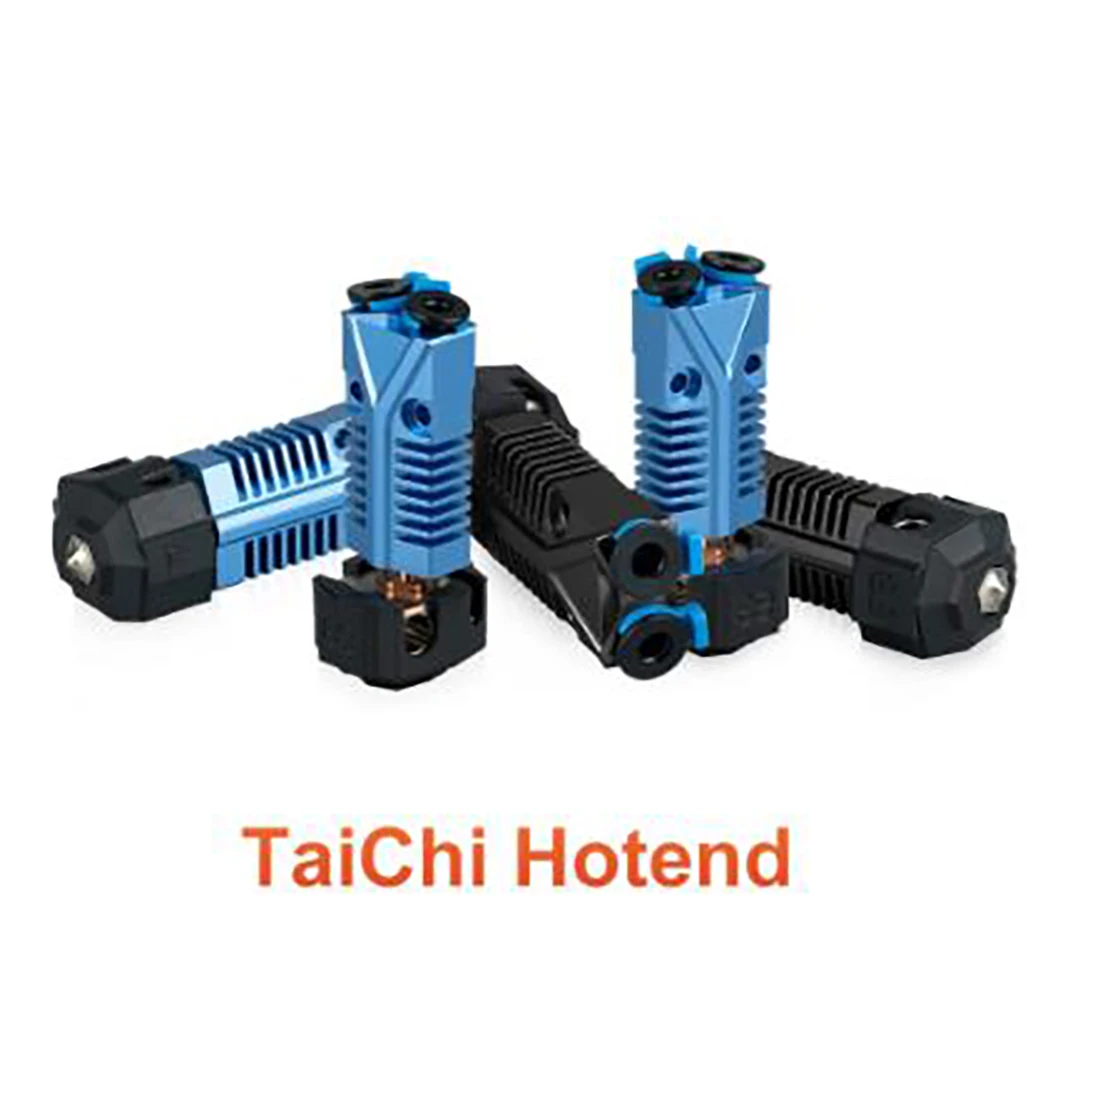 

Phaetus TaiChi Hotend Two-in-one Hotend with Dual Filament Feed for the Creality Ender and CR Series 3D Printer